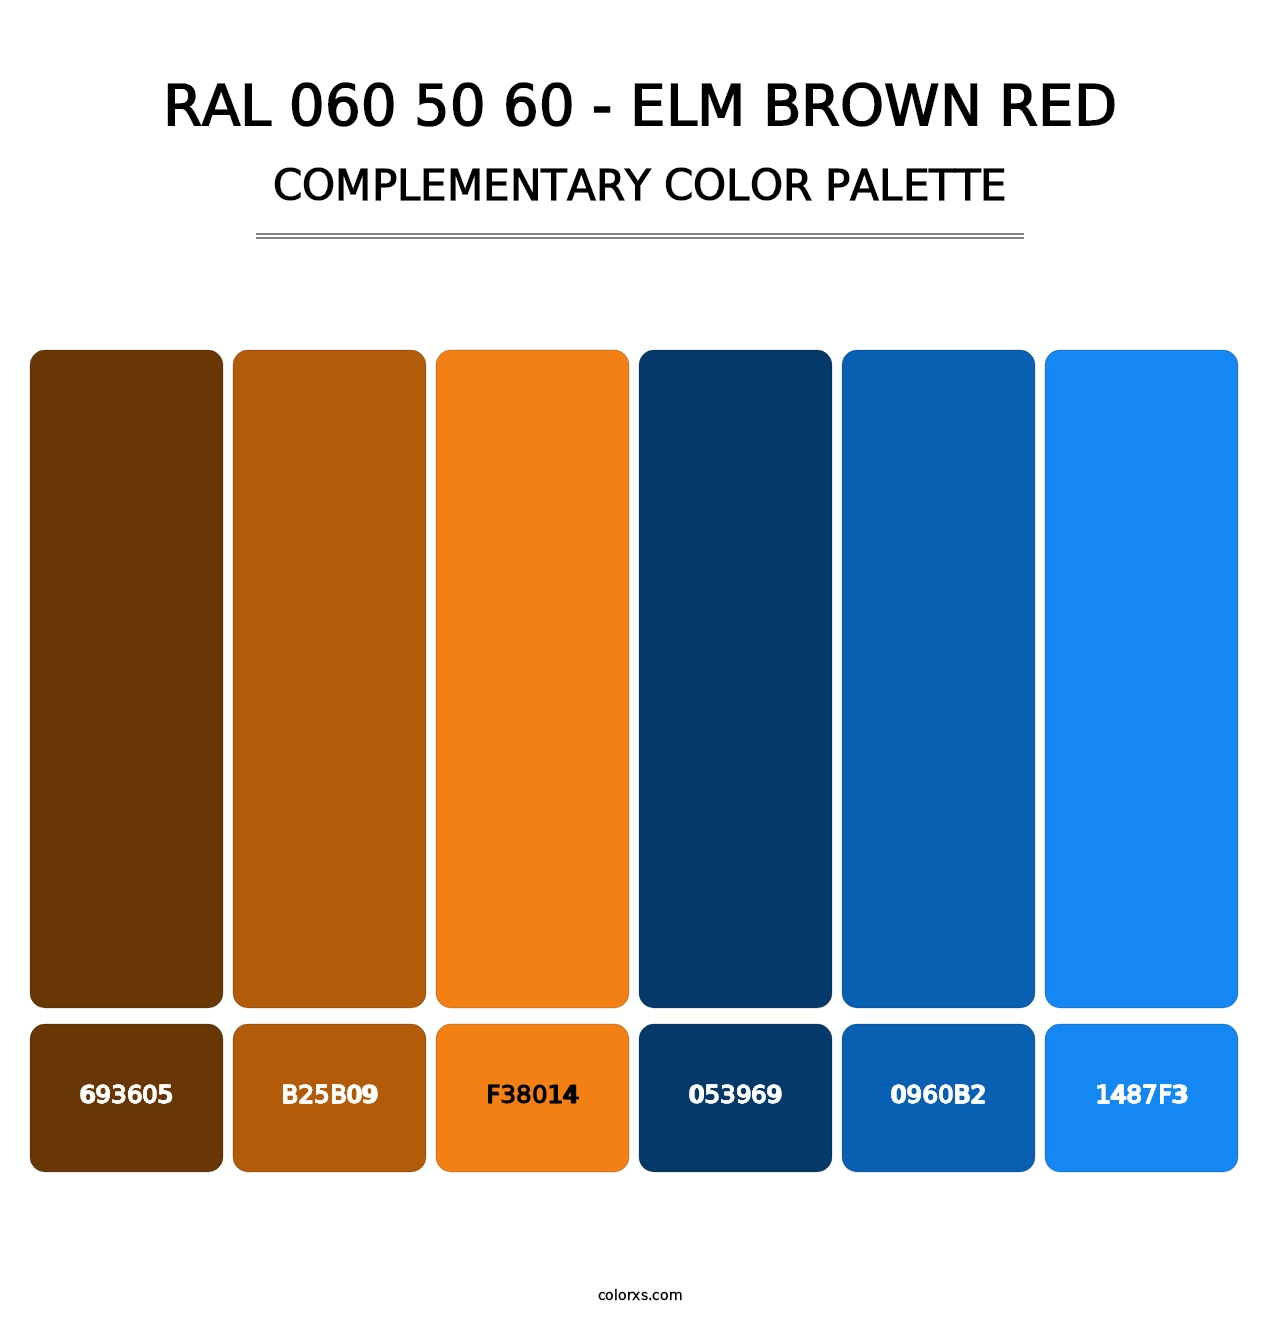 RAL 060 50 60 - Elm Brown Red - Complementary Color Palette